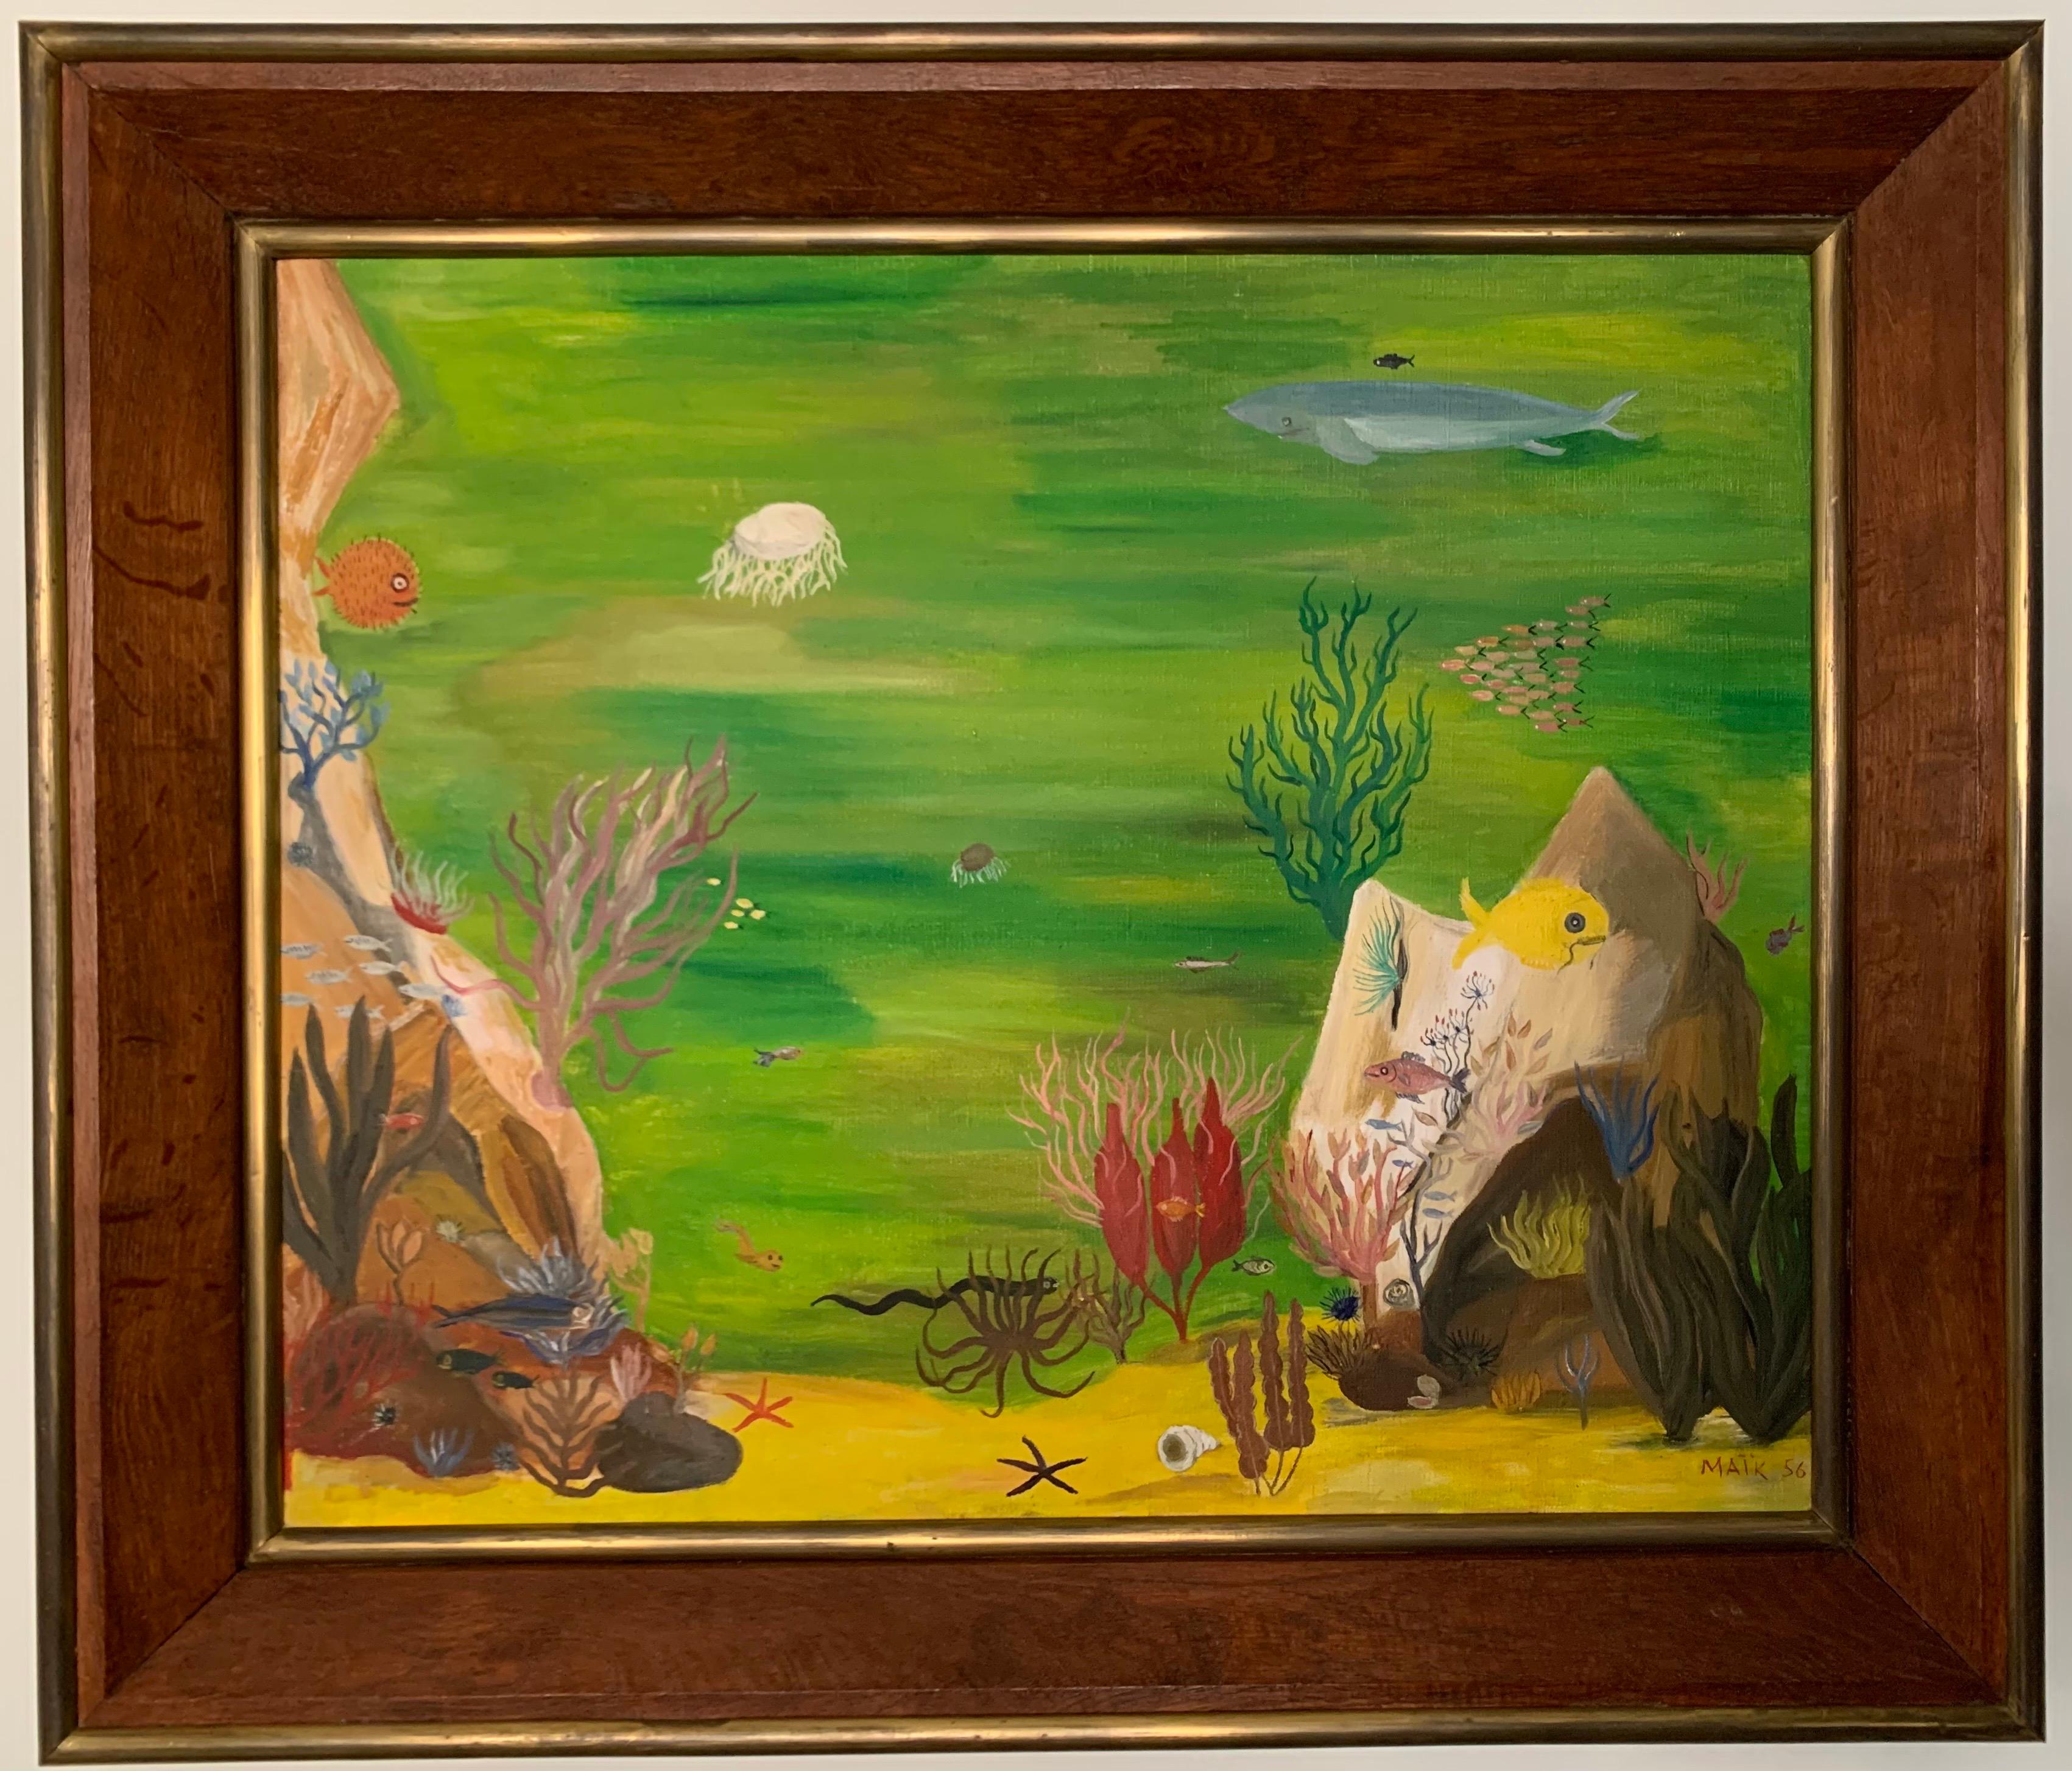 Oil on canvas
by Henri Hecht MAÏK (1922-1993).
“Underwater Landscape”.
sign and date lower right “MAÏK 56”.
Framed with a natural oak and gilded brass French frame, circa 1950.
Canvas dimensions: 54 x 64,5 cm.
Overall dimensions: 69,5 x 80 cm.